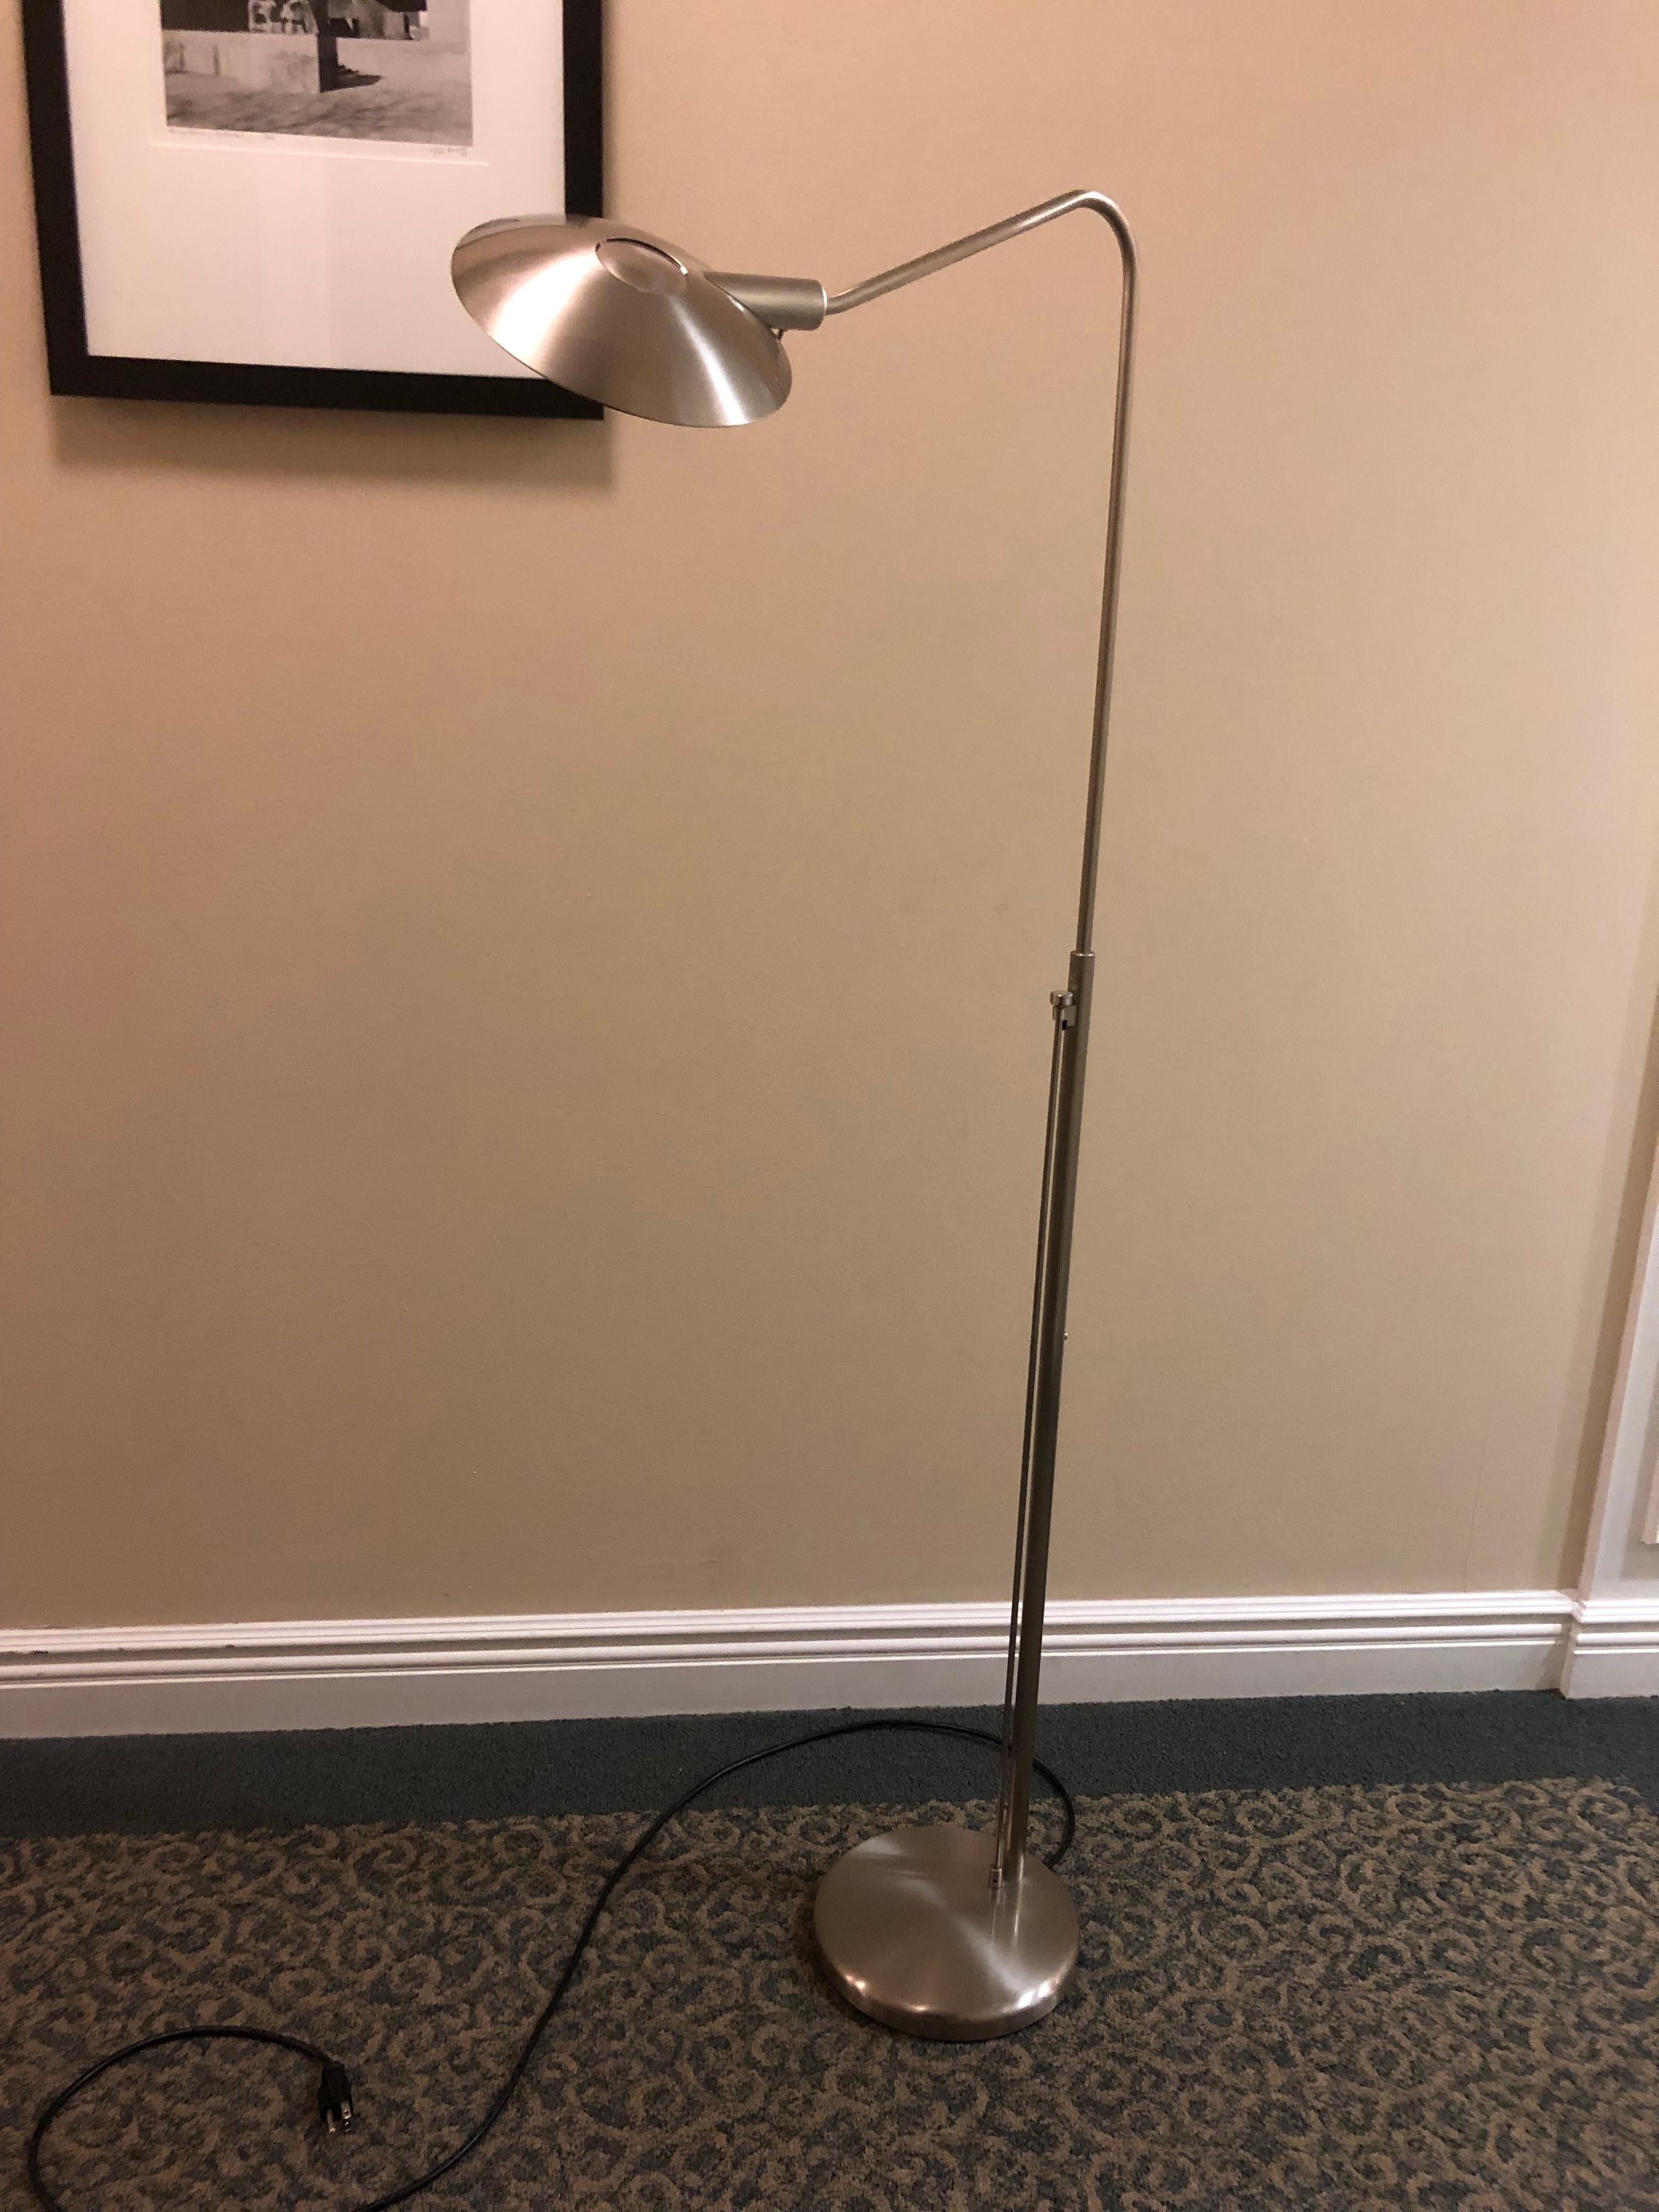 Stylish modern reading floor lamp with swing arm offering both direct and indirect light. Uses 120V/200W halogen bulb. Finished in satin nickel. Shade can be tilted and angled. 
Adjustable height is between 44”and 54” from floor to top of shade.